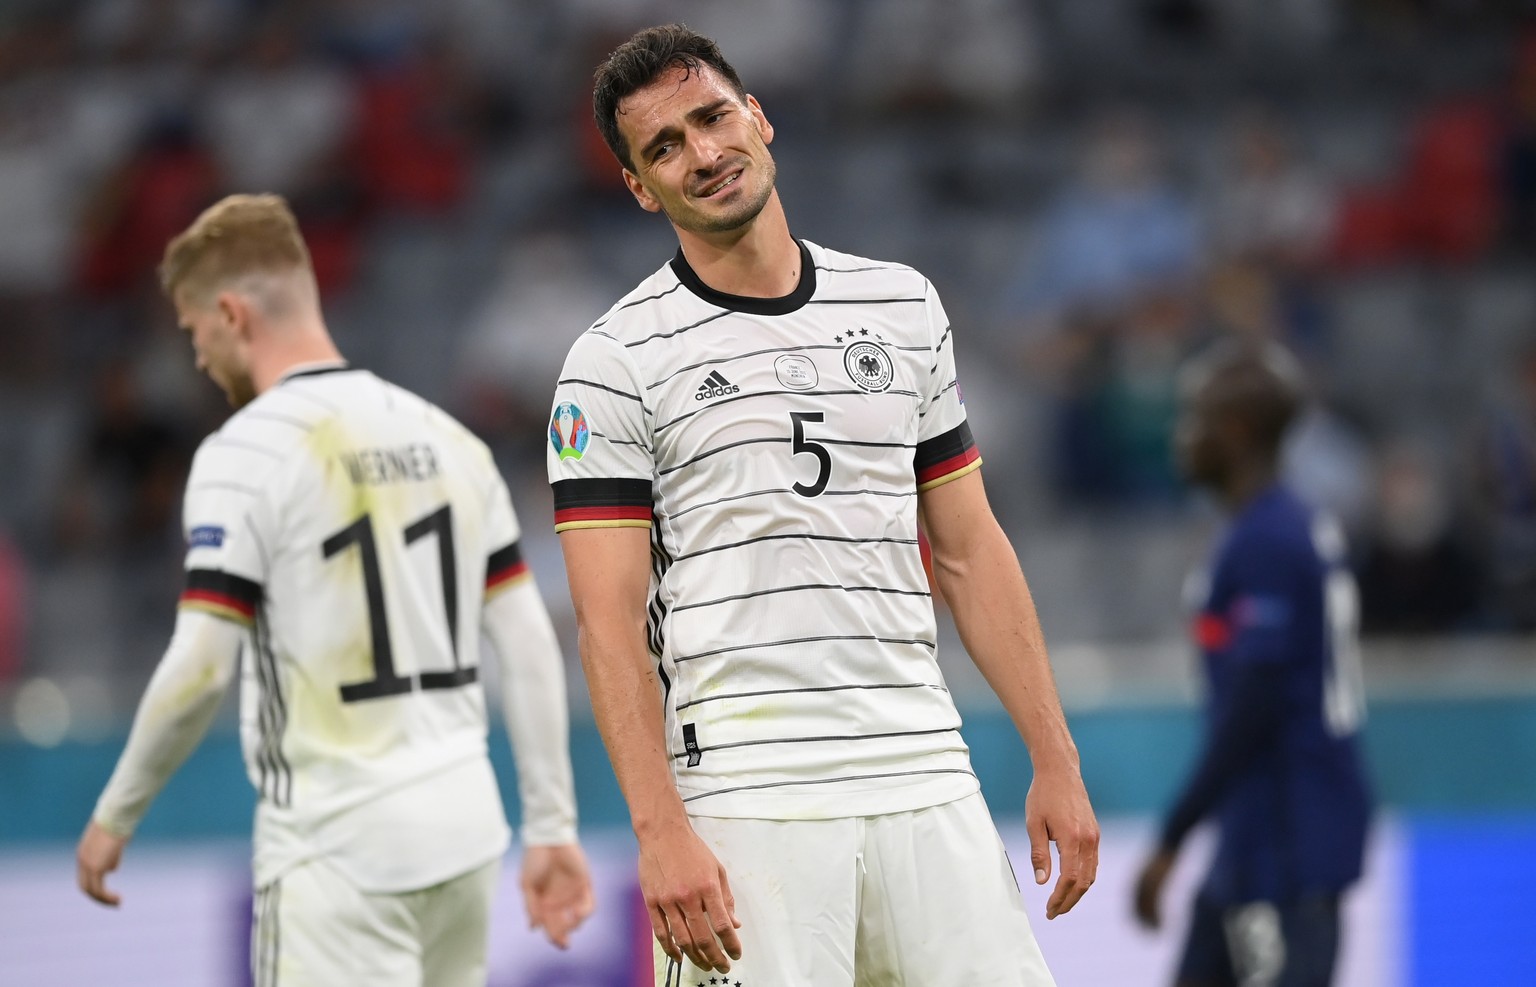 epa09274816 Mats Hummels of Germany reacts during the UEFA EURO 2020 group F preliminary round soccer match between France and Germany in Munich, Germany, 15 June 2021. EPA/Matthias Hangst / POOL (RES ...